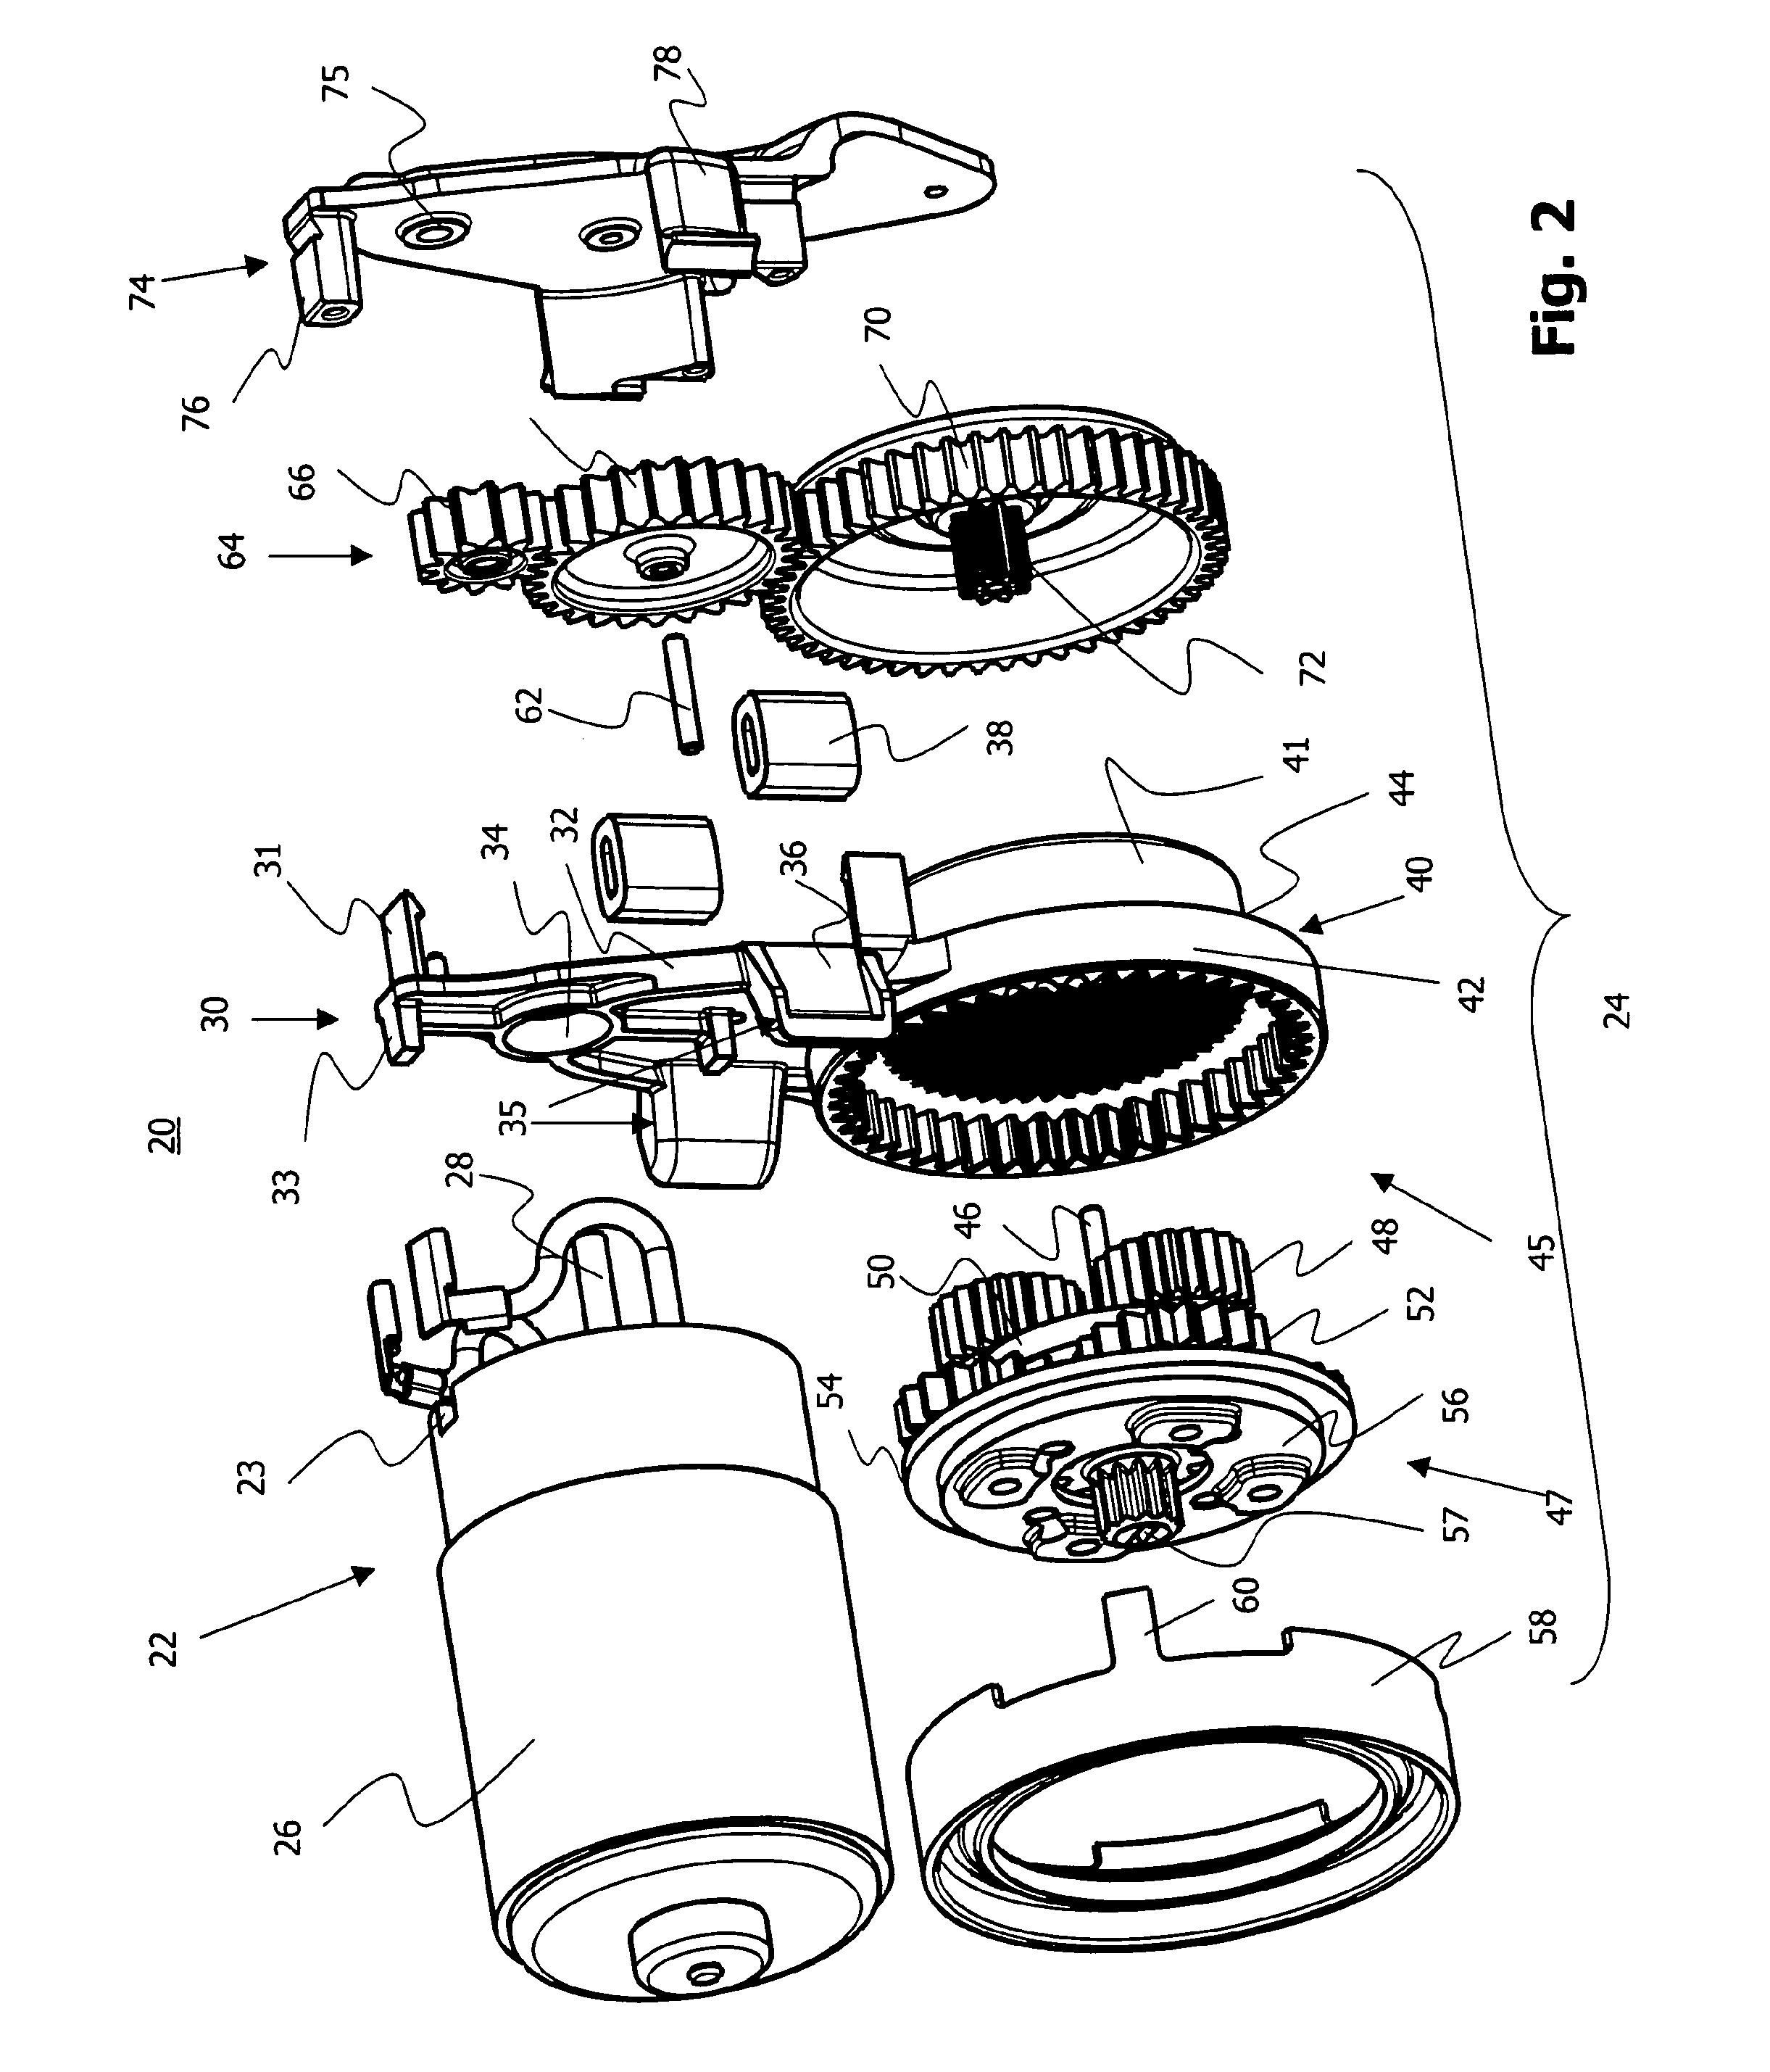 Sub-Assembly for an Electromechanical Brake Actuator